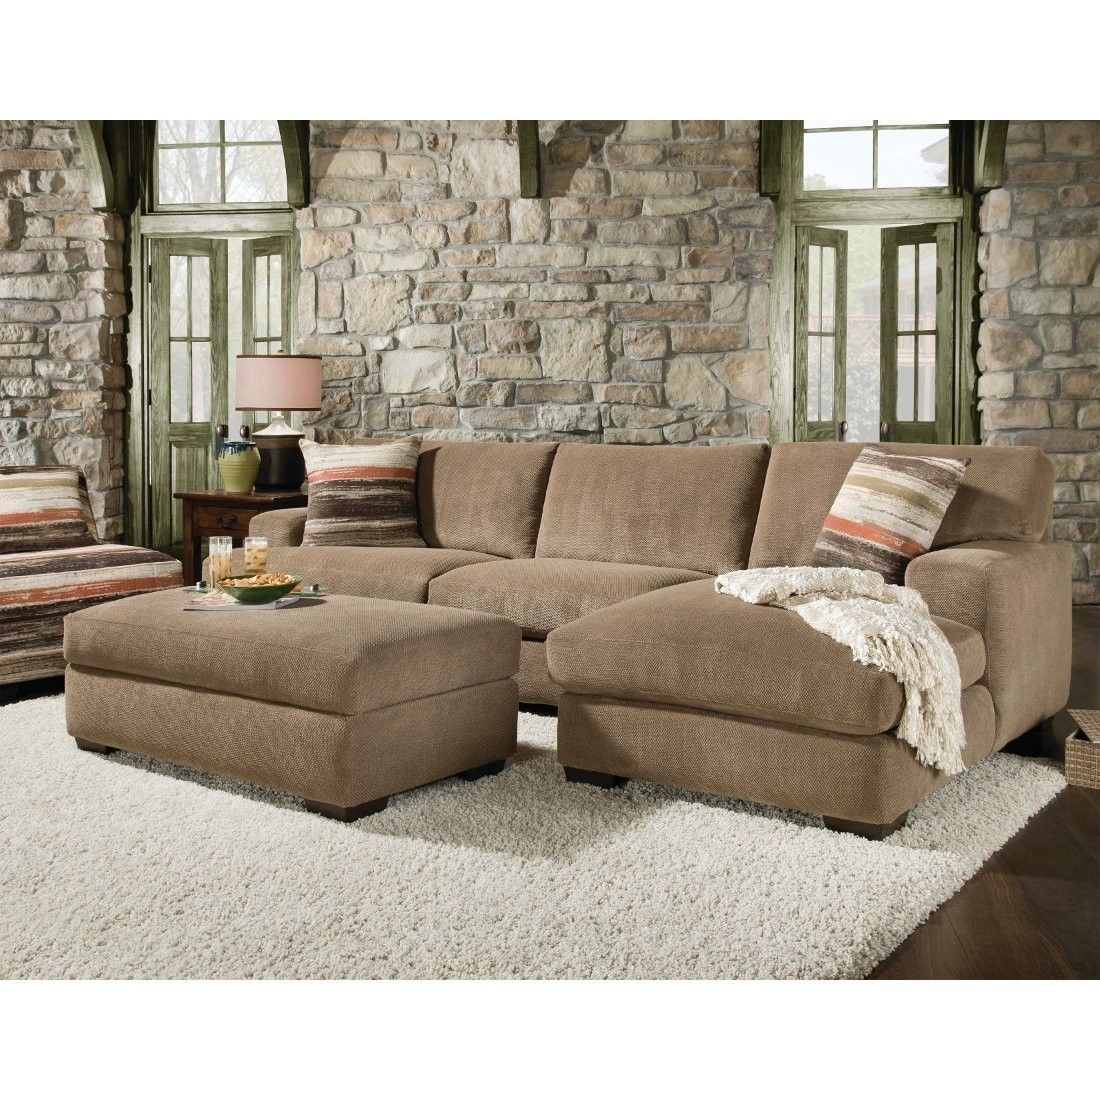 Beautiful Sectional Sofa With Chaise And Ottoman Pictures Throughout Sectional Sofas With Chaise And Ottoman (View 1 of 10)